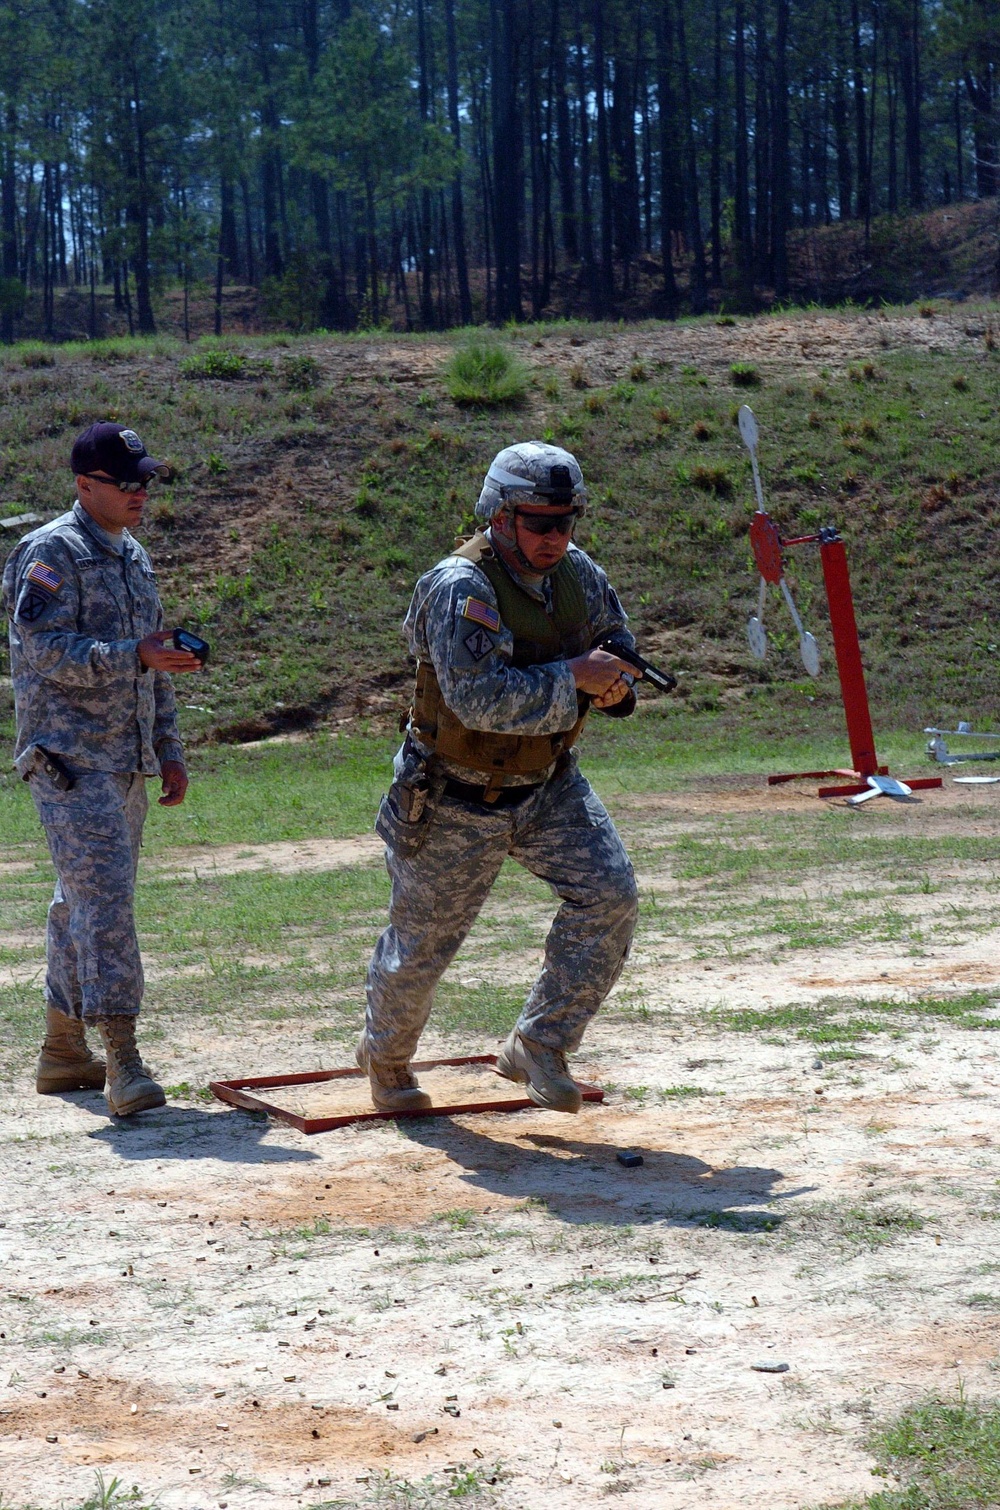 84th Training Command Soldiers take top honors at ALLARMY